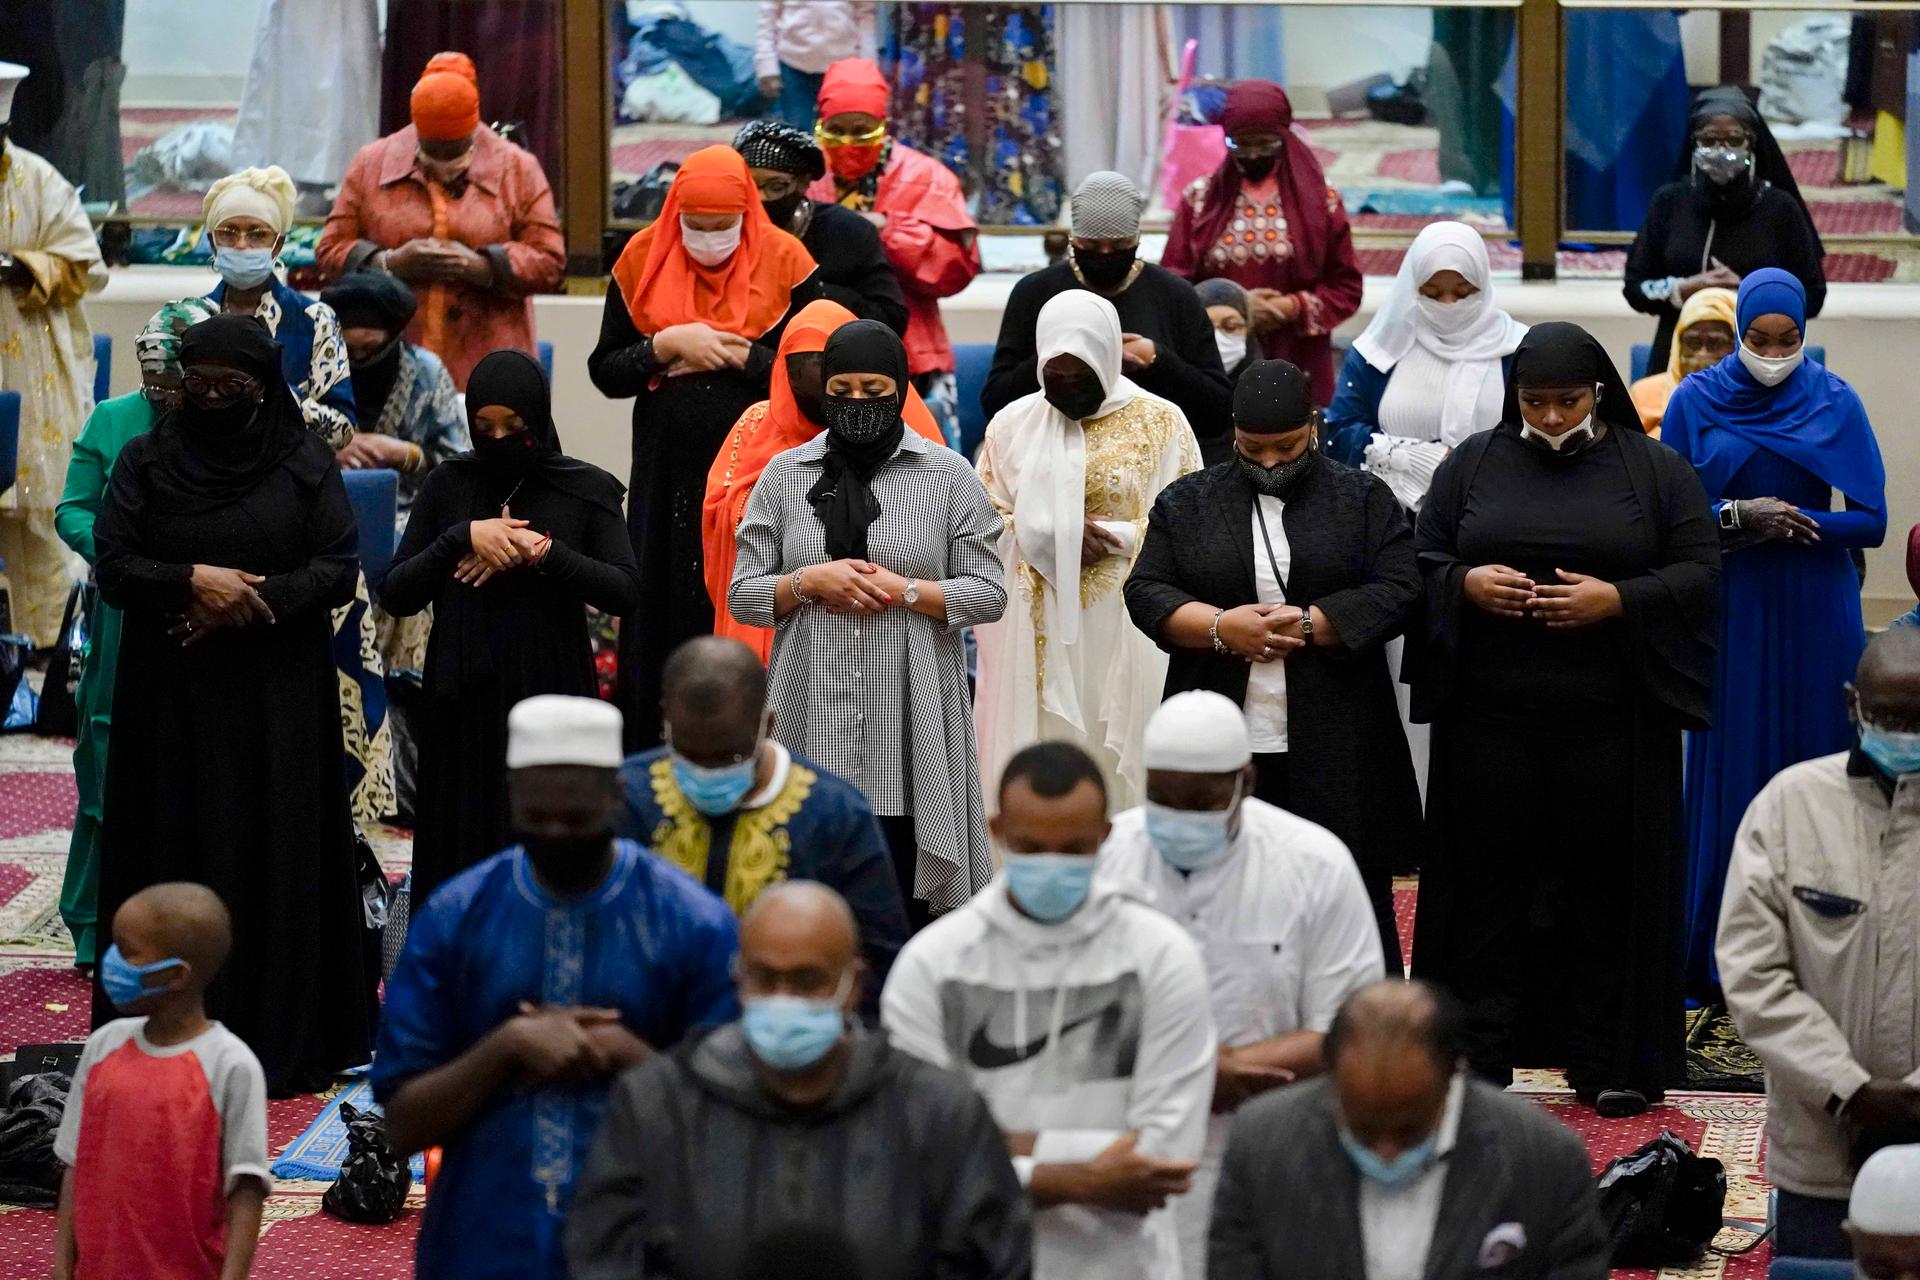 Worshippers perform an Eid al-Fitr prayer at the Masjidullah Mosque in Philadelphia, on Thursday, May 13, 2021